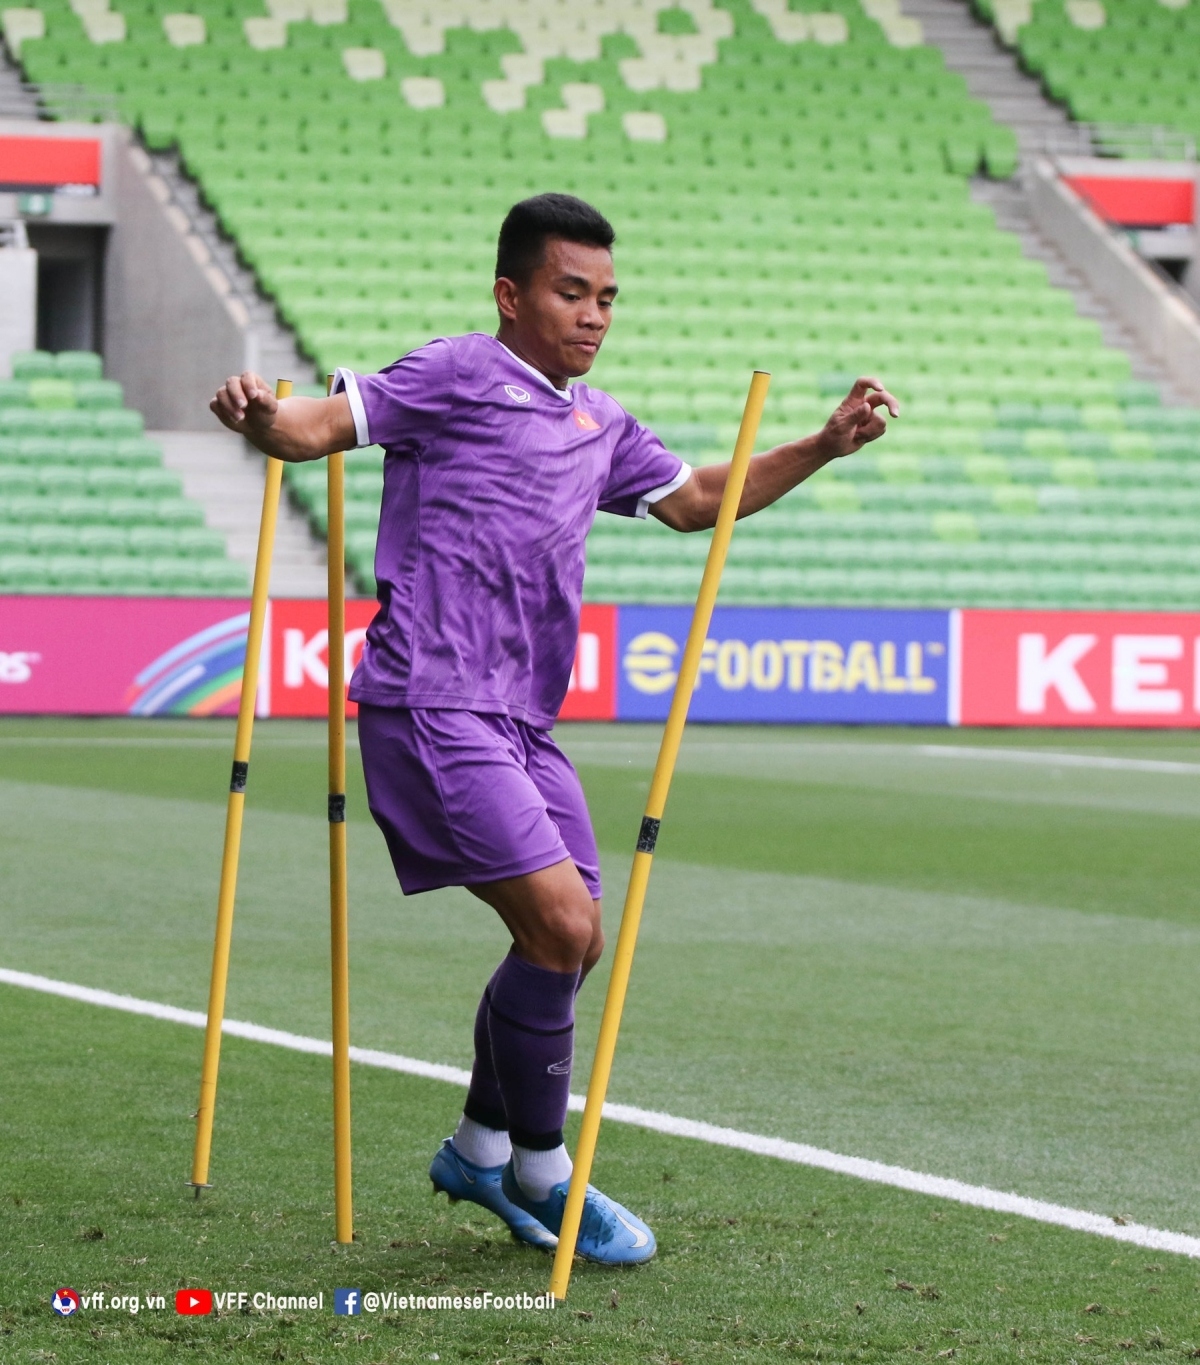 Striker Ho Thanh Minh practices hard, hoping to perform for the national team for the first time.